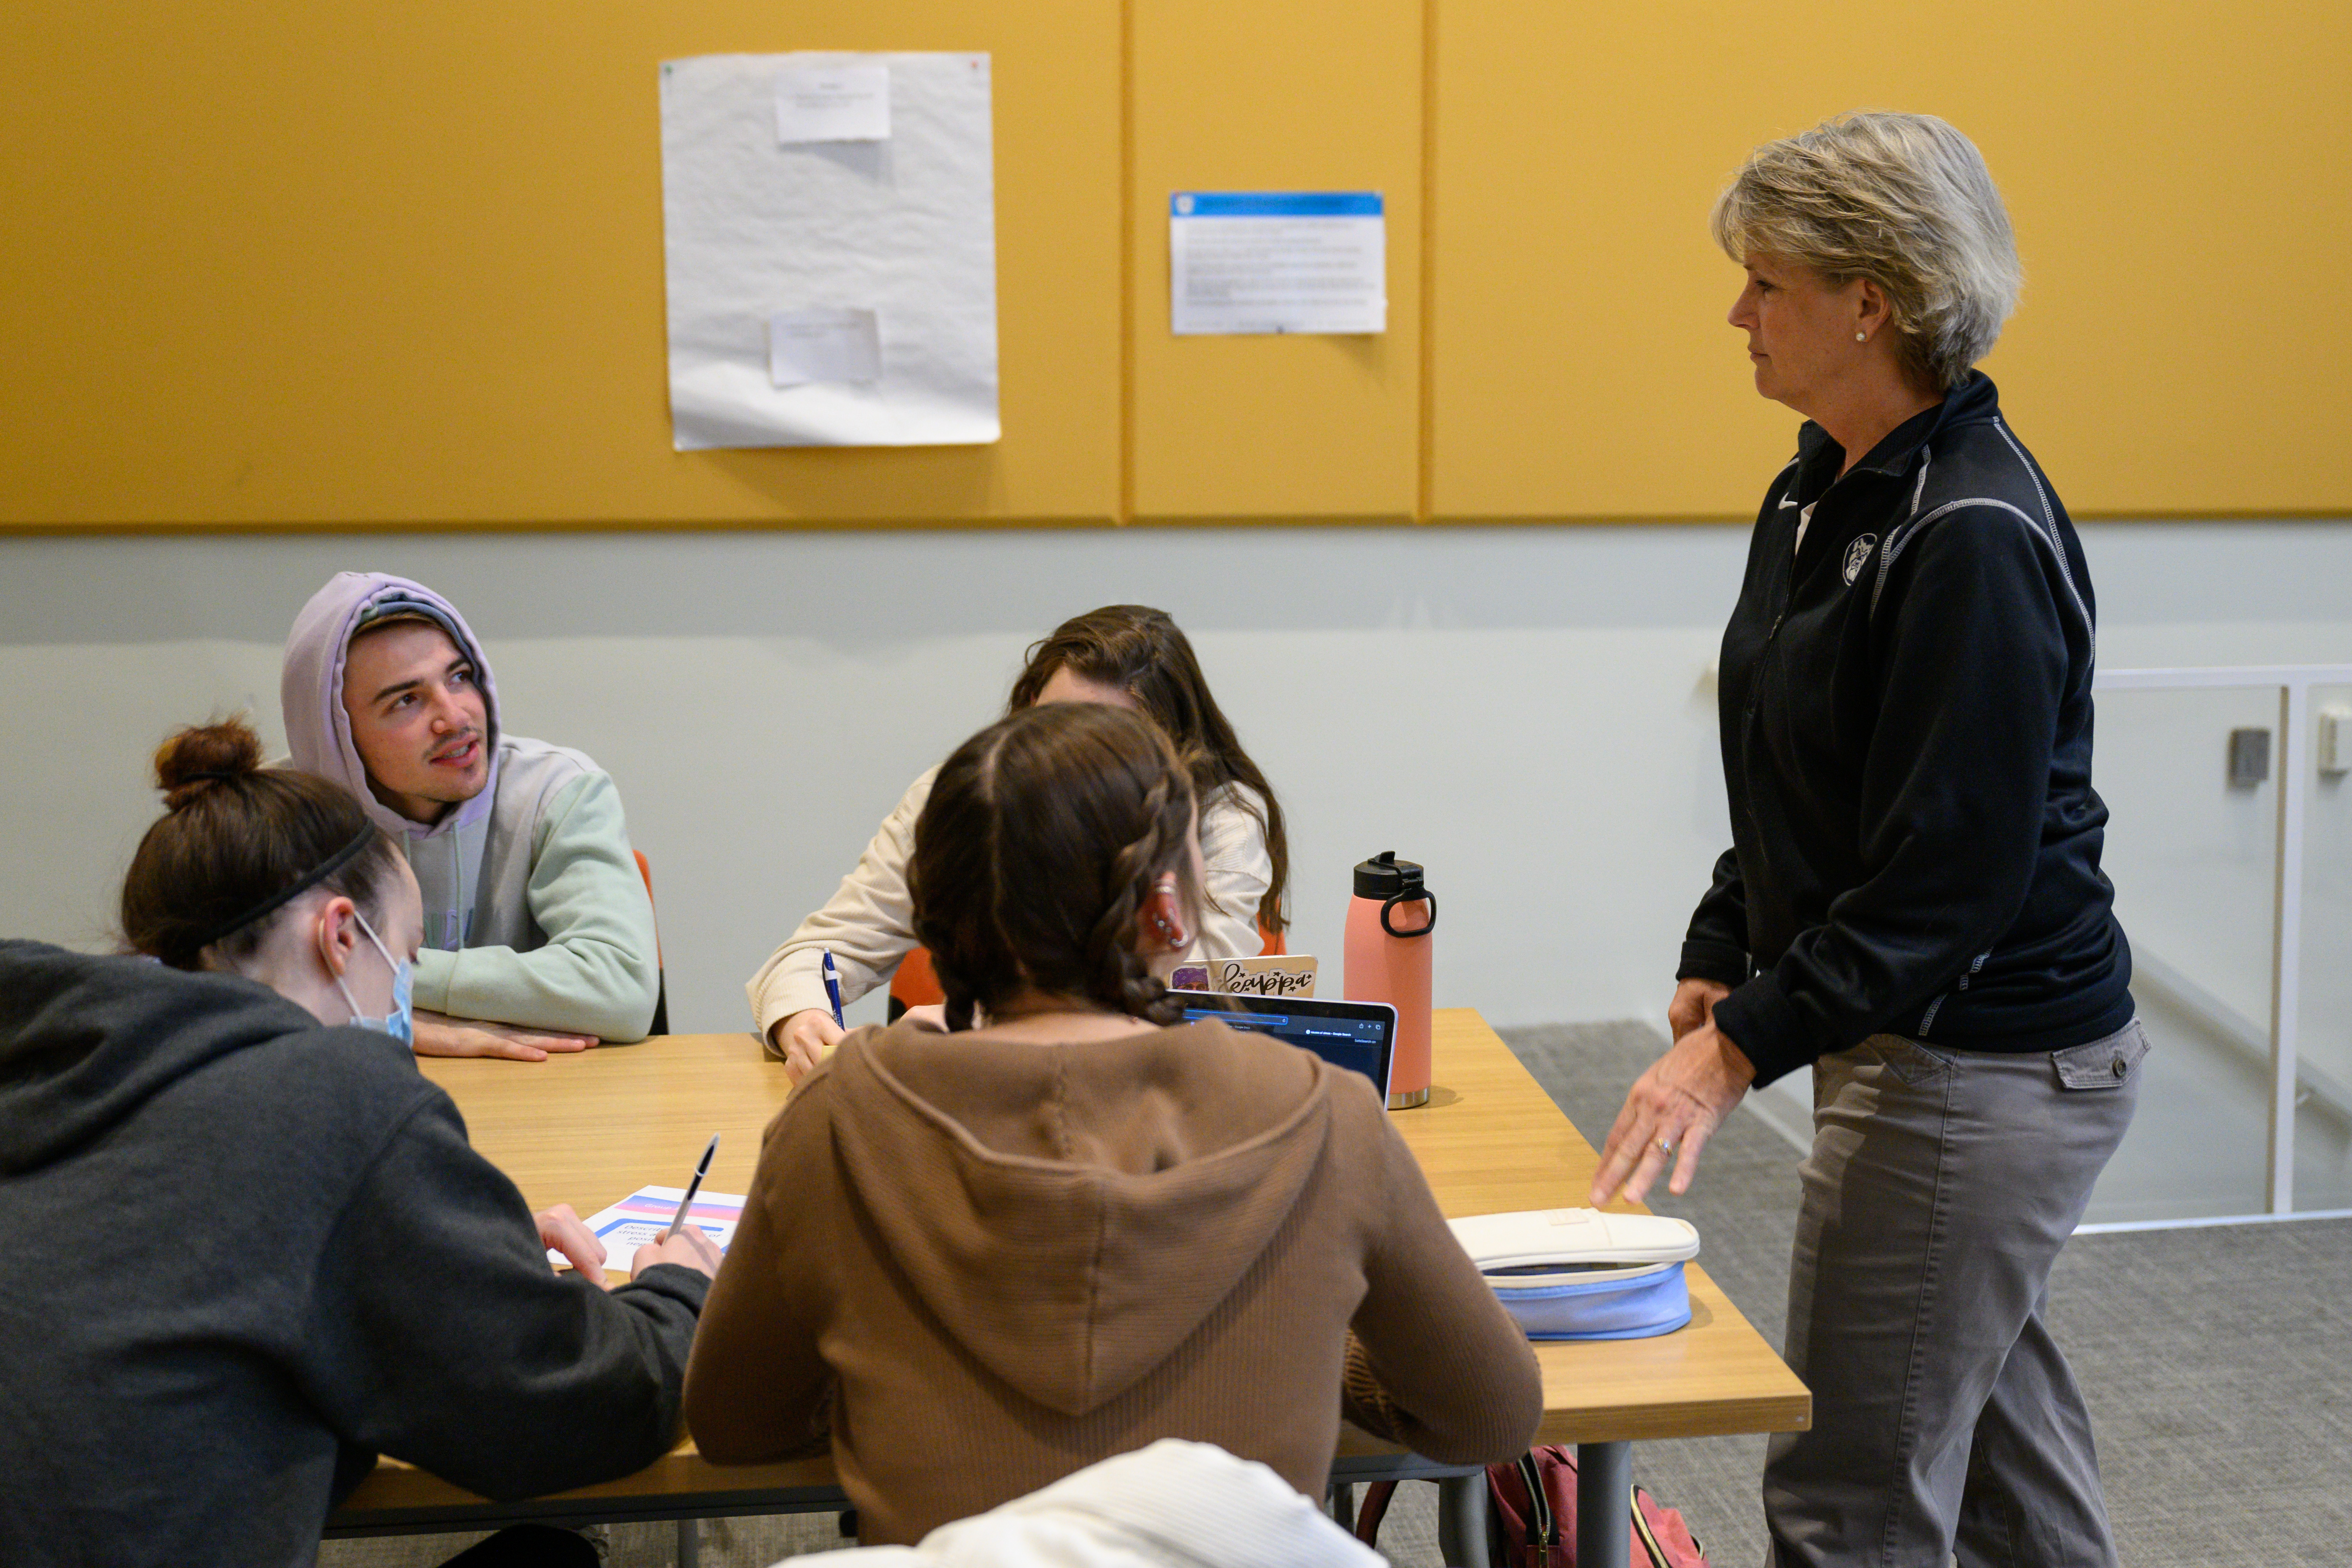 A professor stands at a table talking to a group of four students.